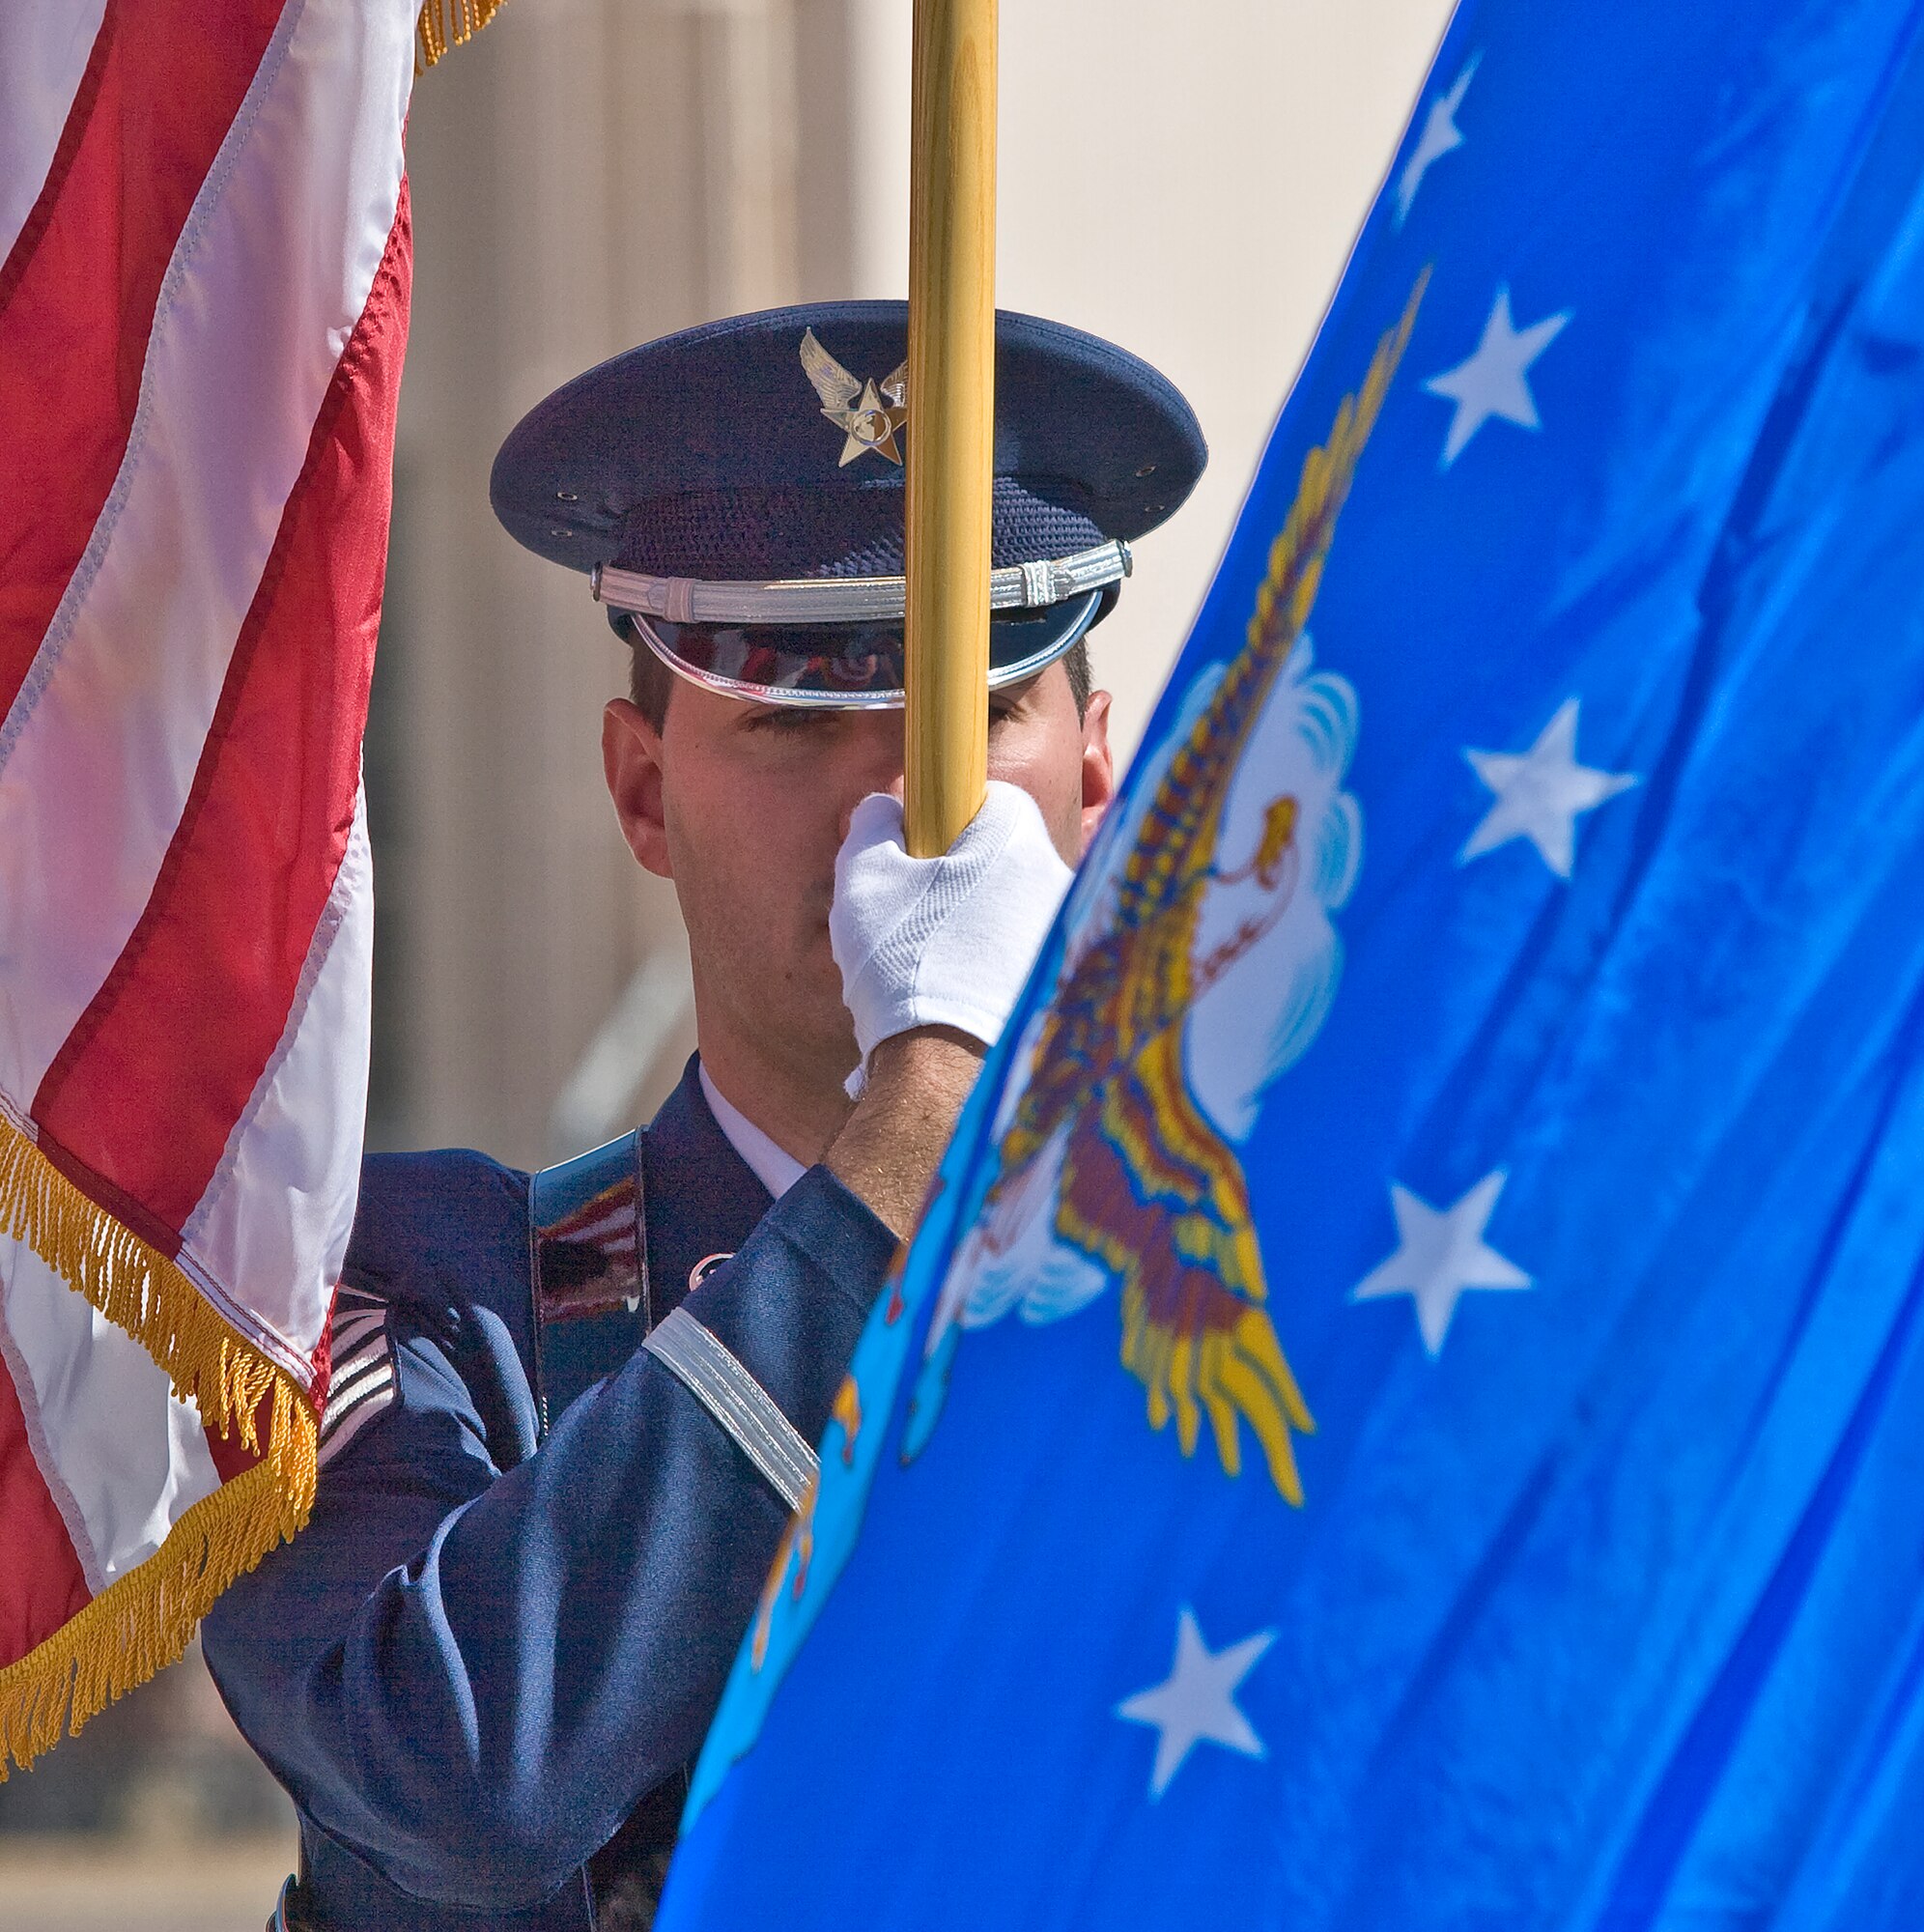 Master Sgt. Thomas Whiteman, a Northeast Air Defense Sector Honor Guard member, stands at attention during a ceremony. Sergeant Whiteman was selected as the Honor Guard Program Manager of the Year for New York State. The Honor Guard Program Manager of the Year was awarded to Sergeant Whiteman in both 2005 and 2007.